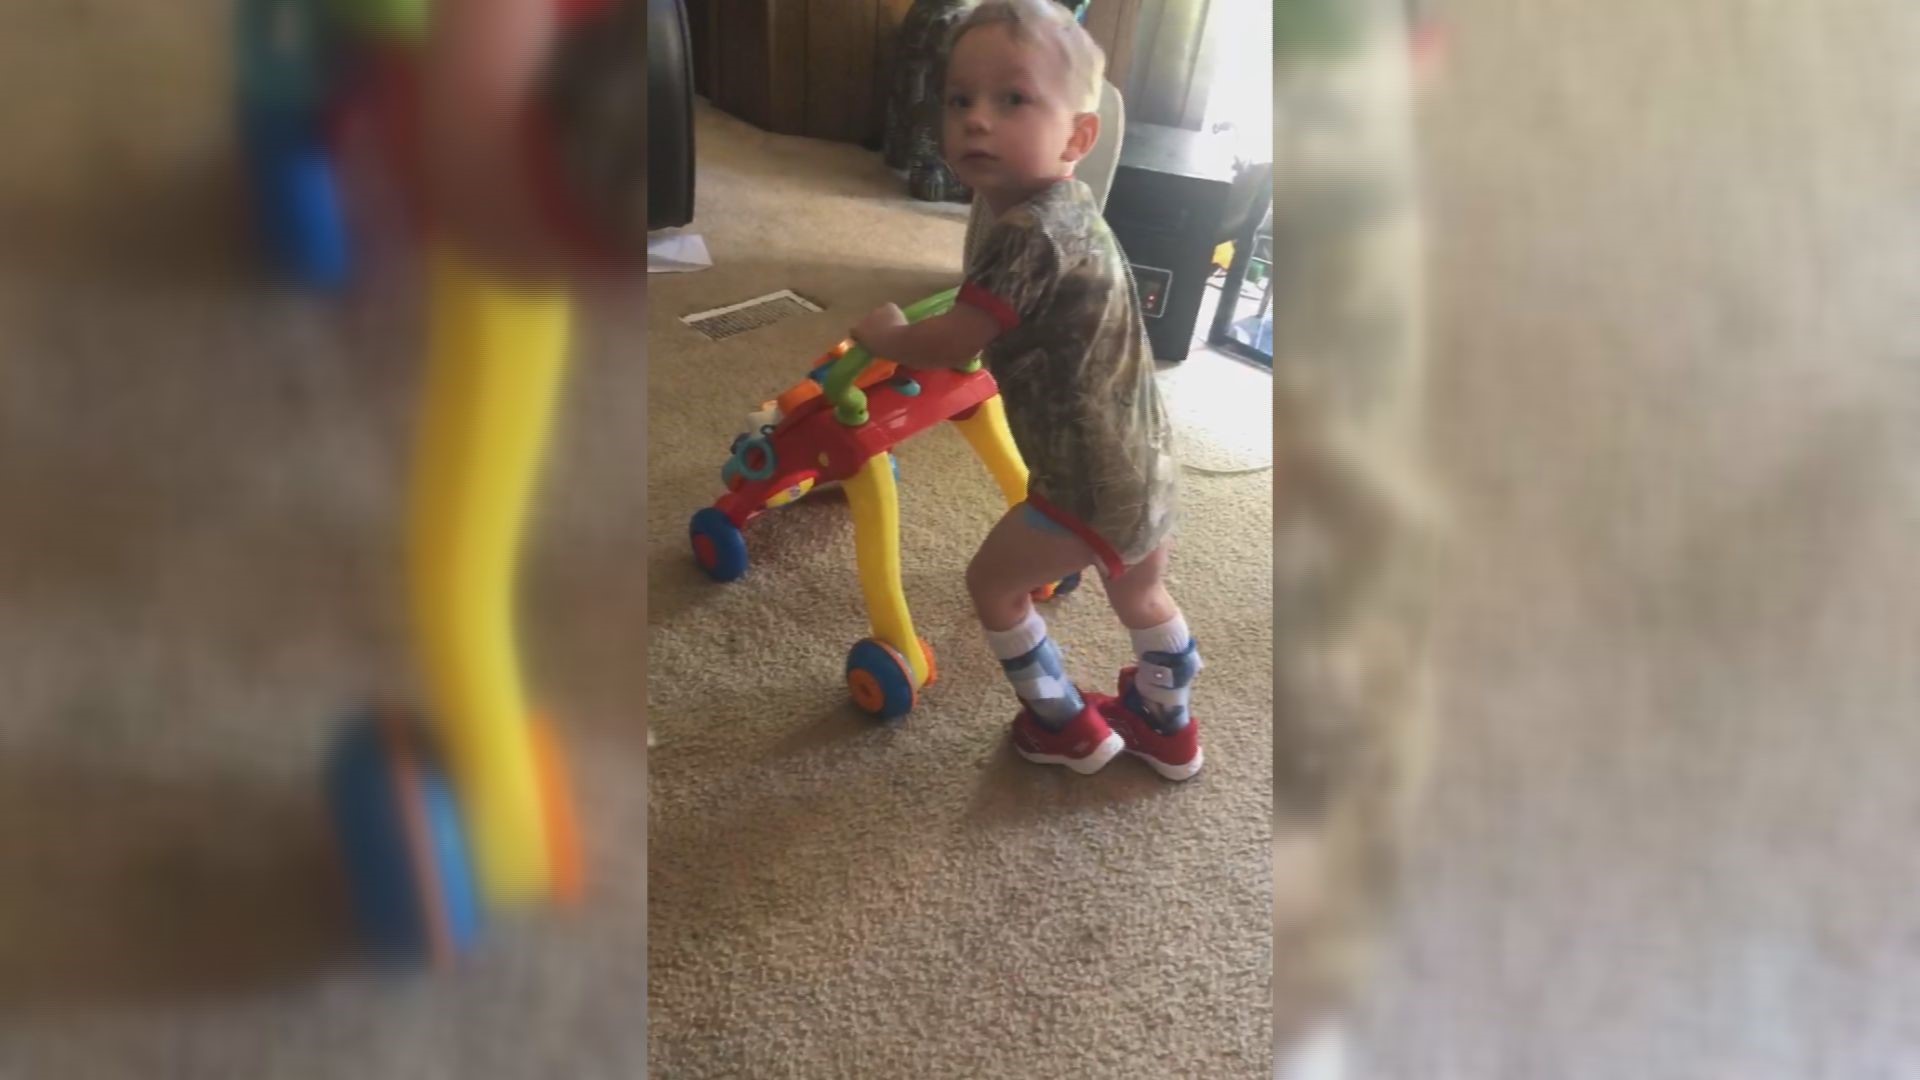 He was placed on life support after he was born and doctors only expected him to live for hours. Now, he has taken his first steps!